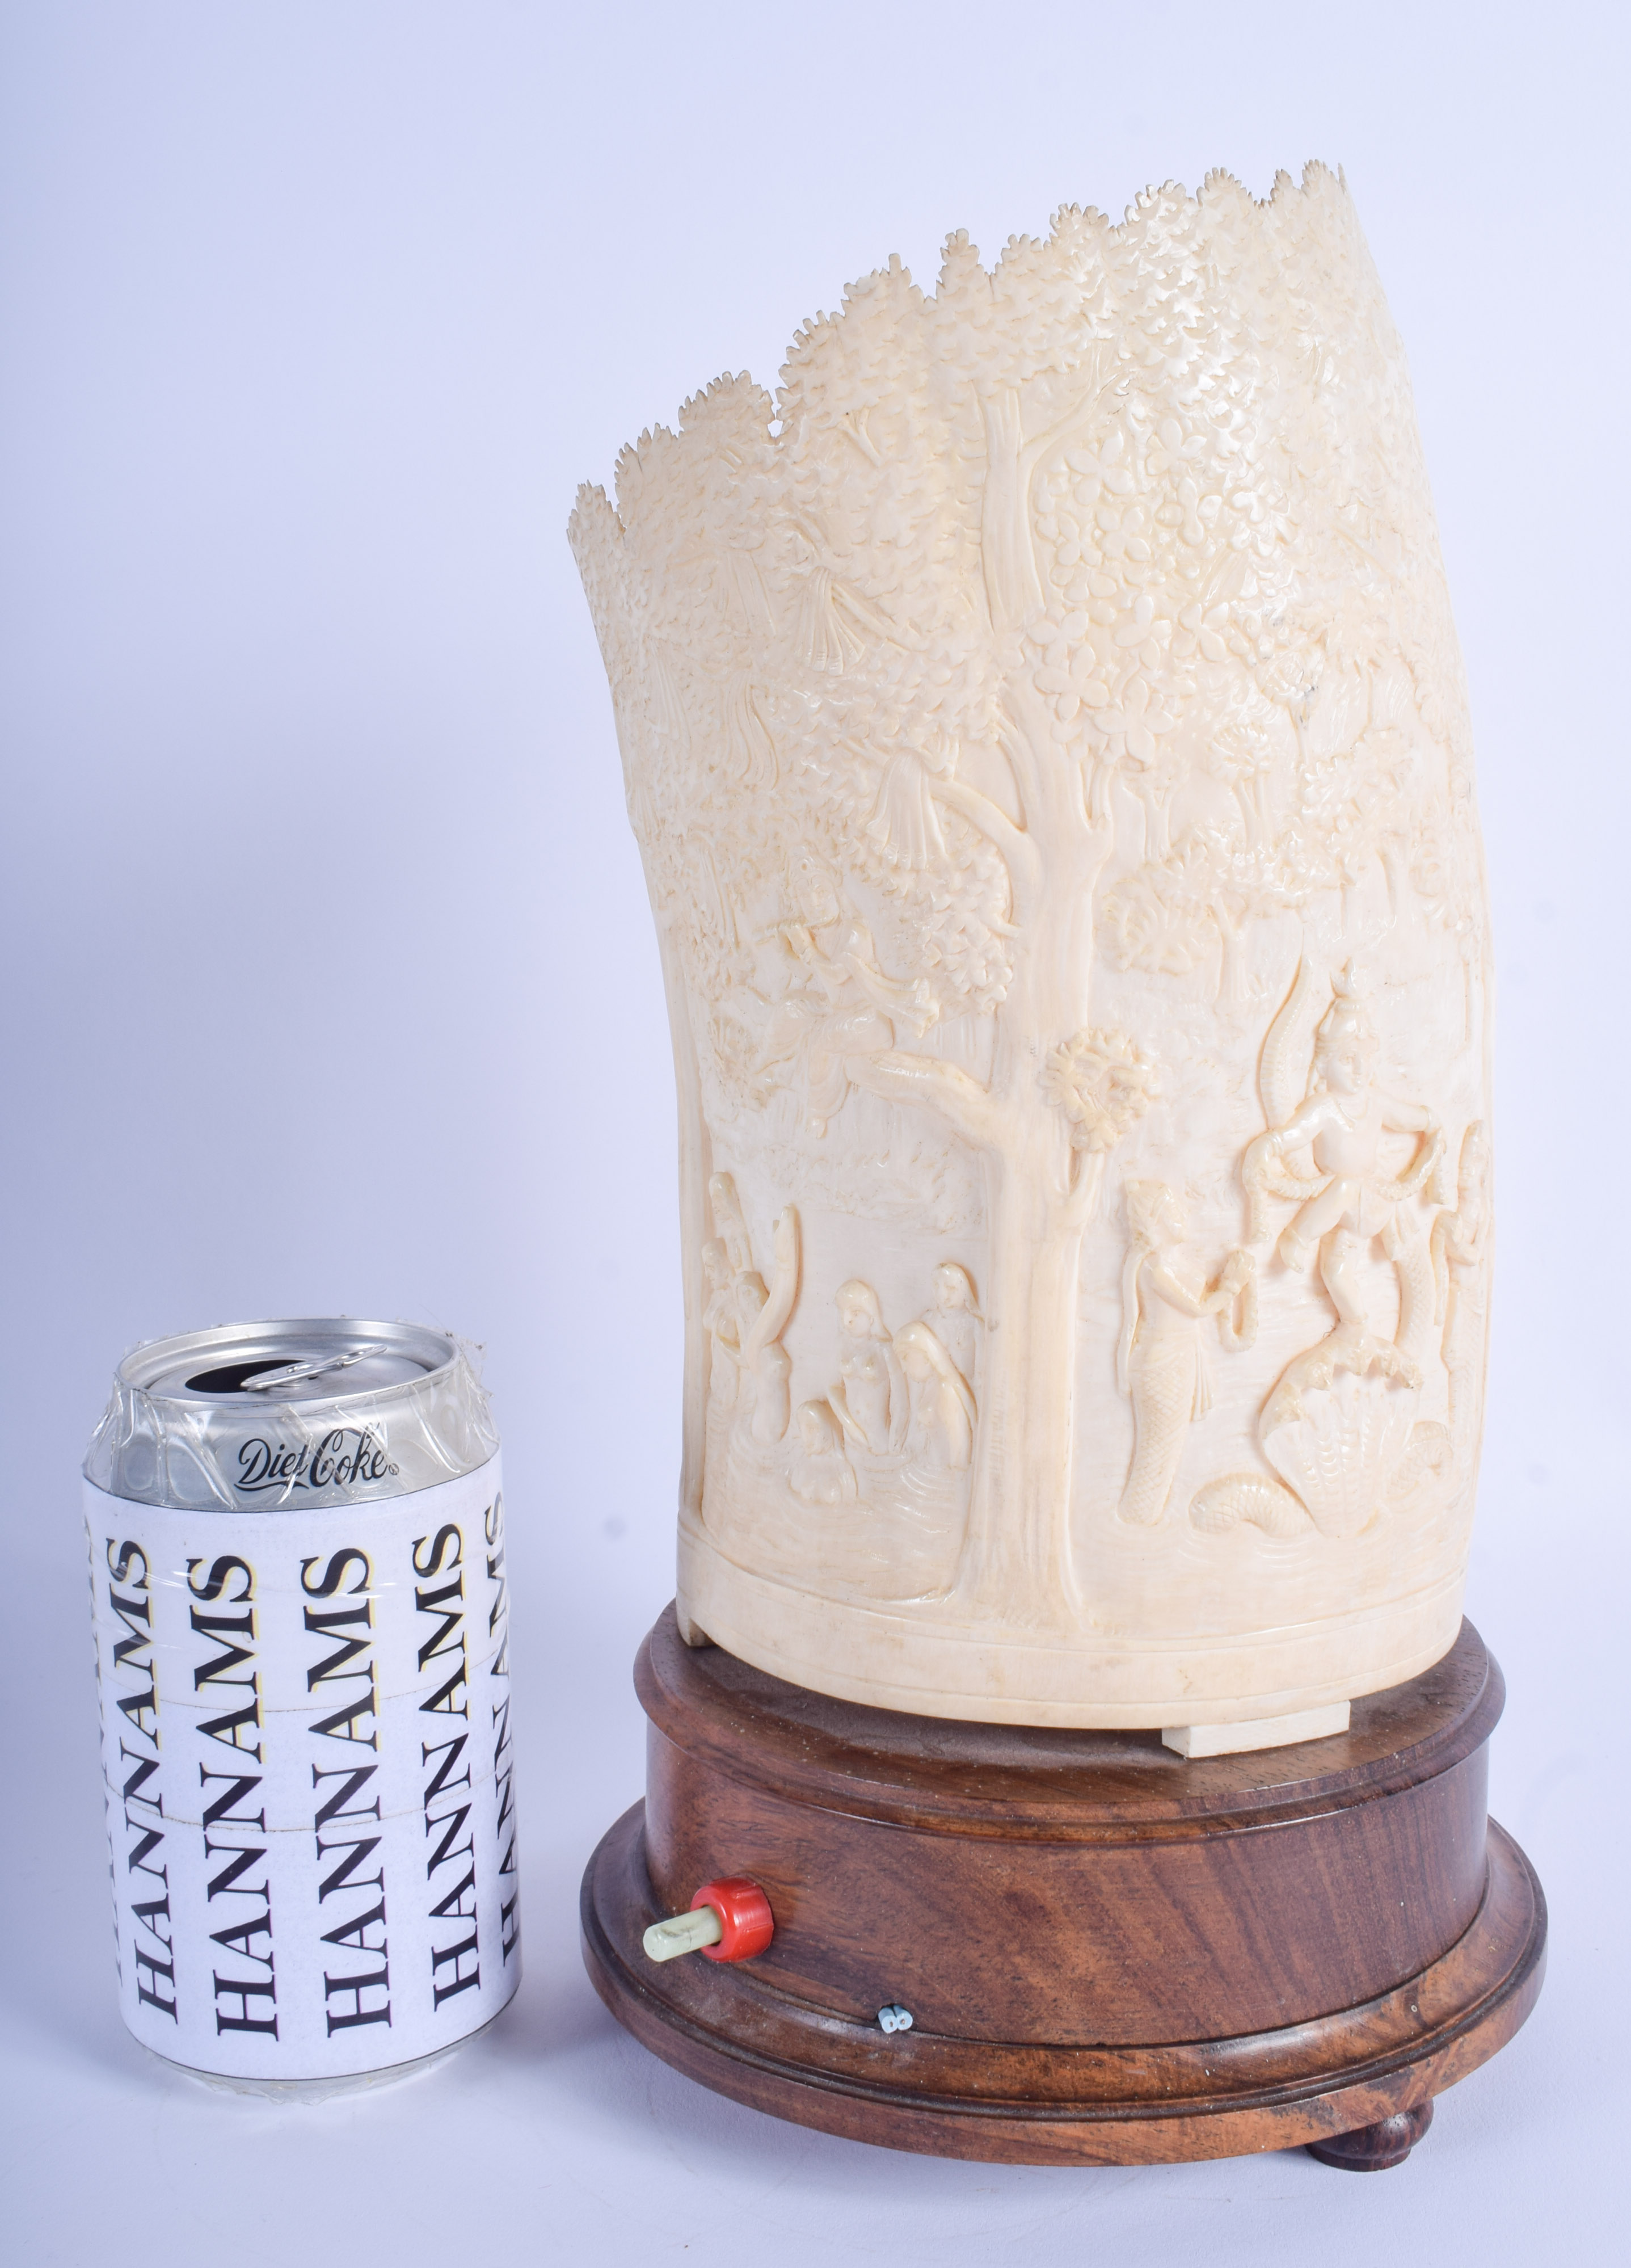 A LARGE 19TH CENTURY ANGLO INDIAN CARVED IVORY VASE converted to a lamp, carved with figures within